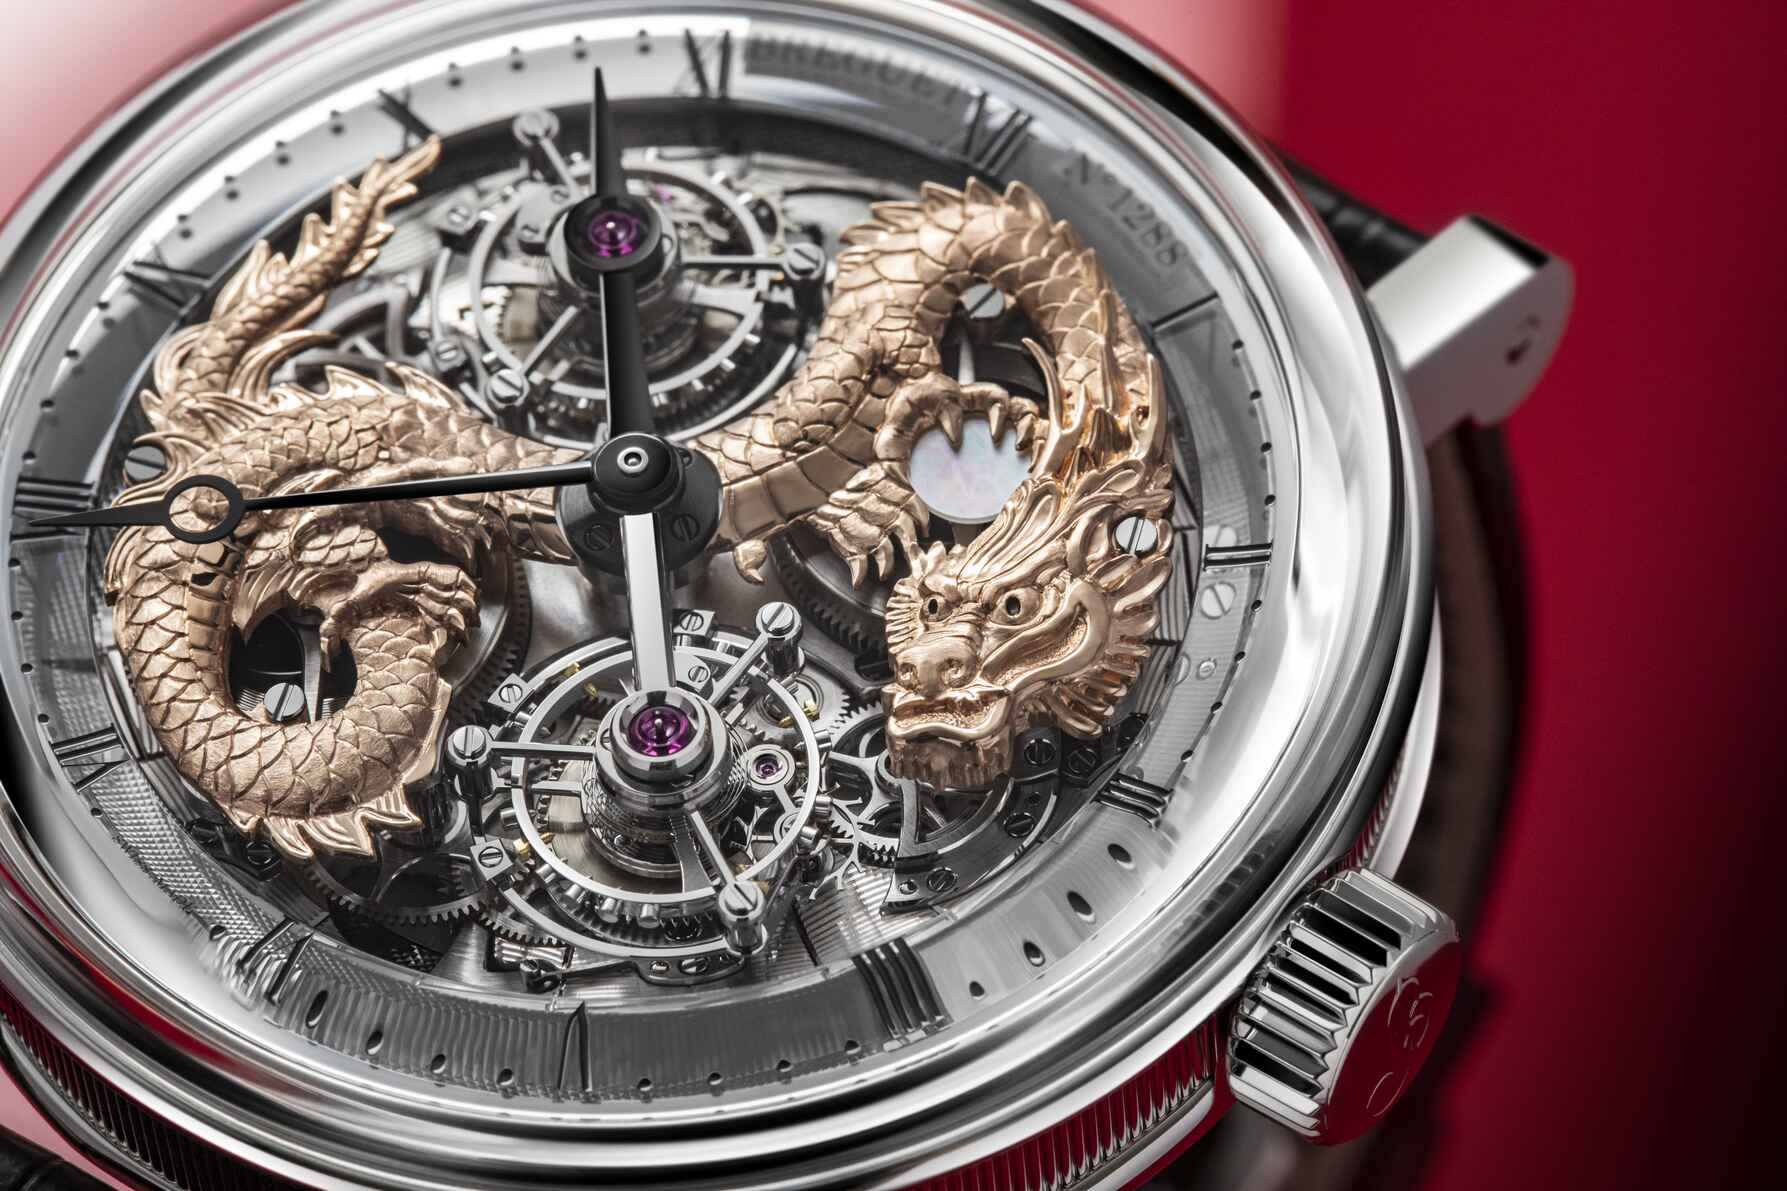 Breguet Classique 5345 & 7145 Year of the Dragon